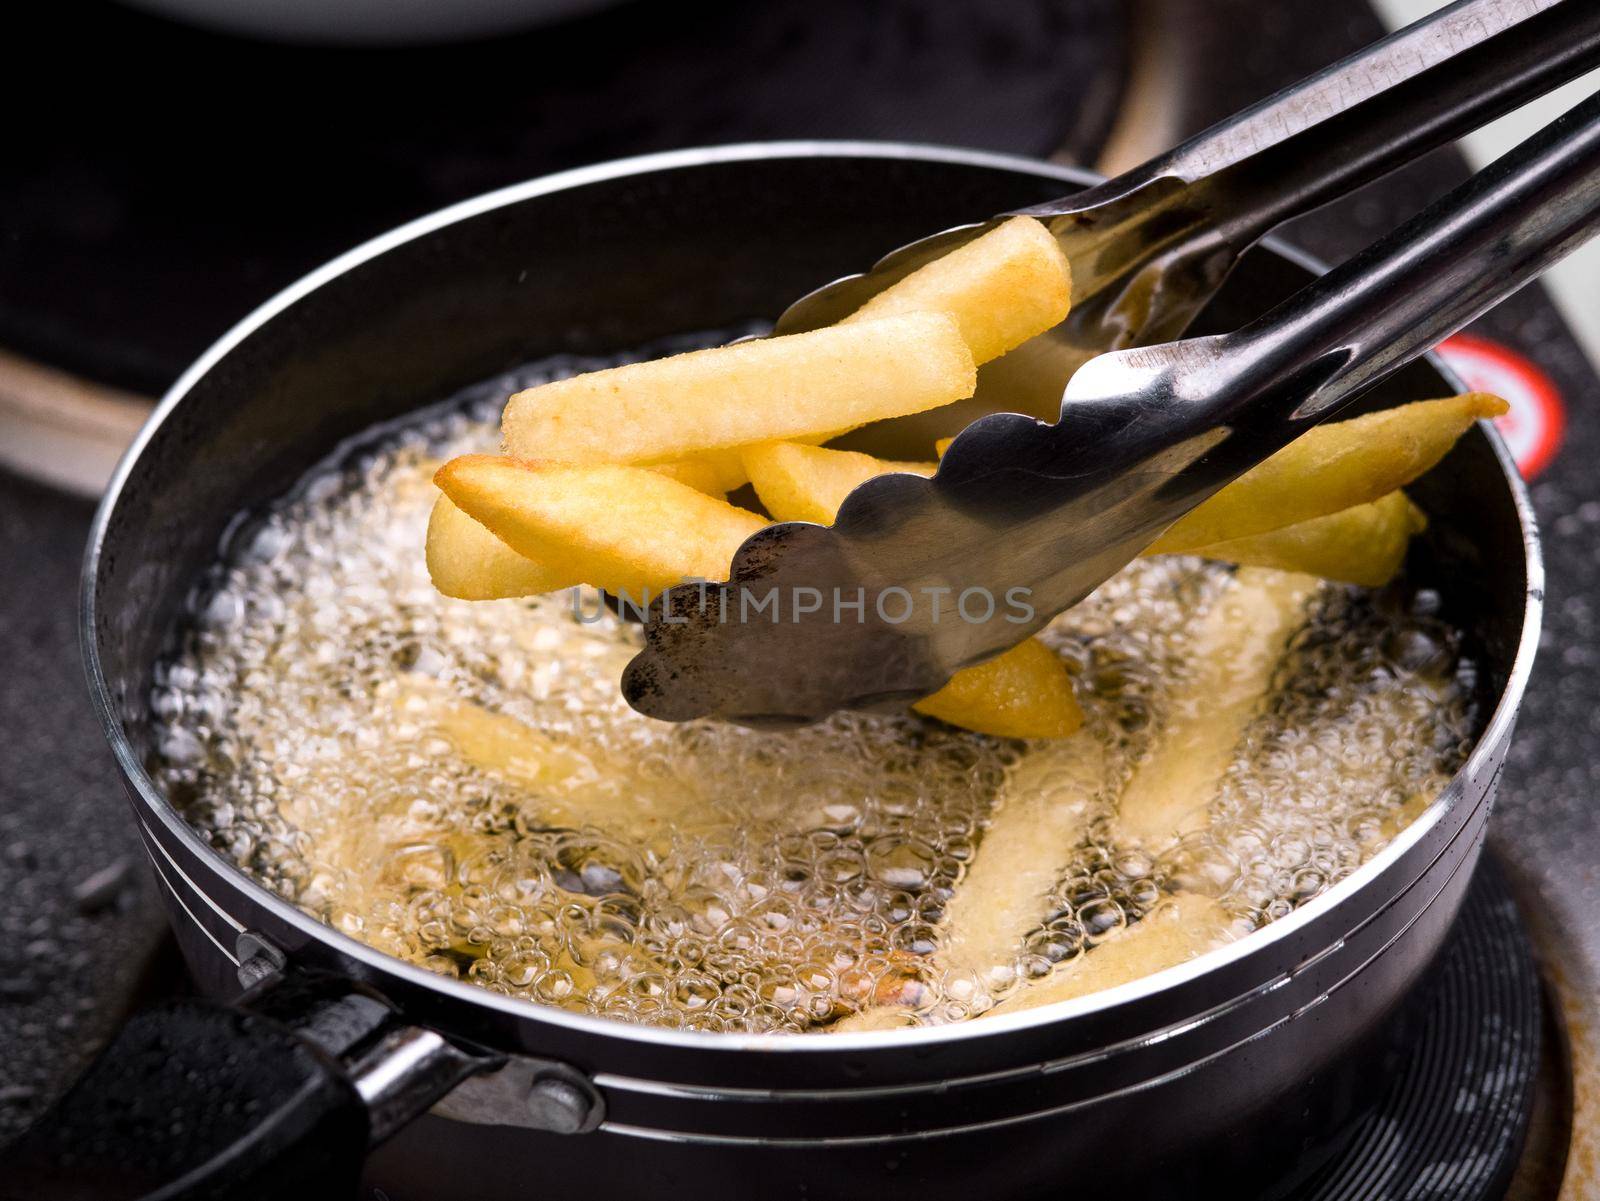 Close up of Frying french fries in the fryer in hot oil on the electric stove in the kitchen. Making homemade french fries.